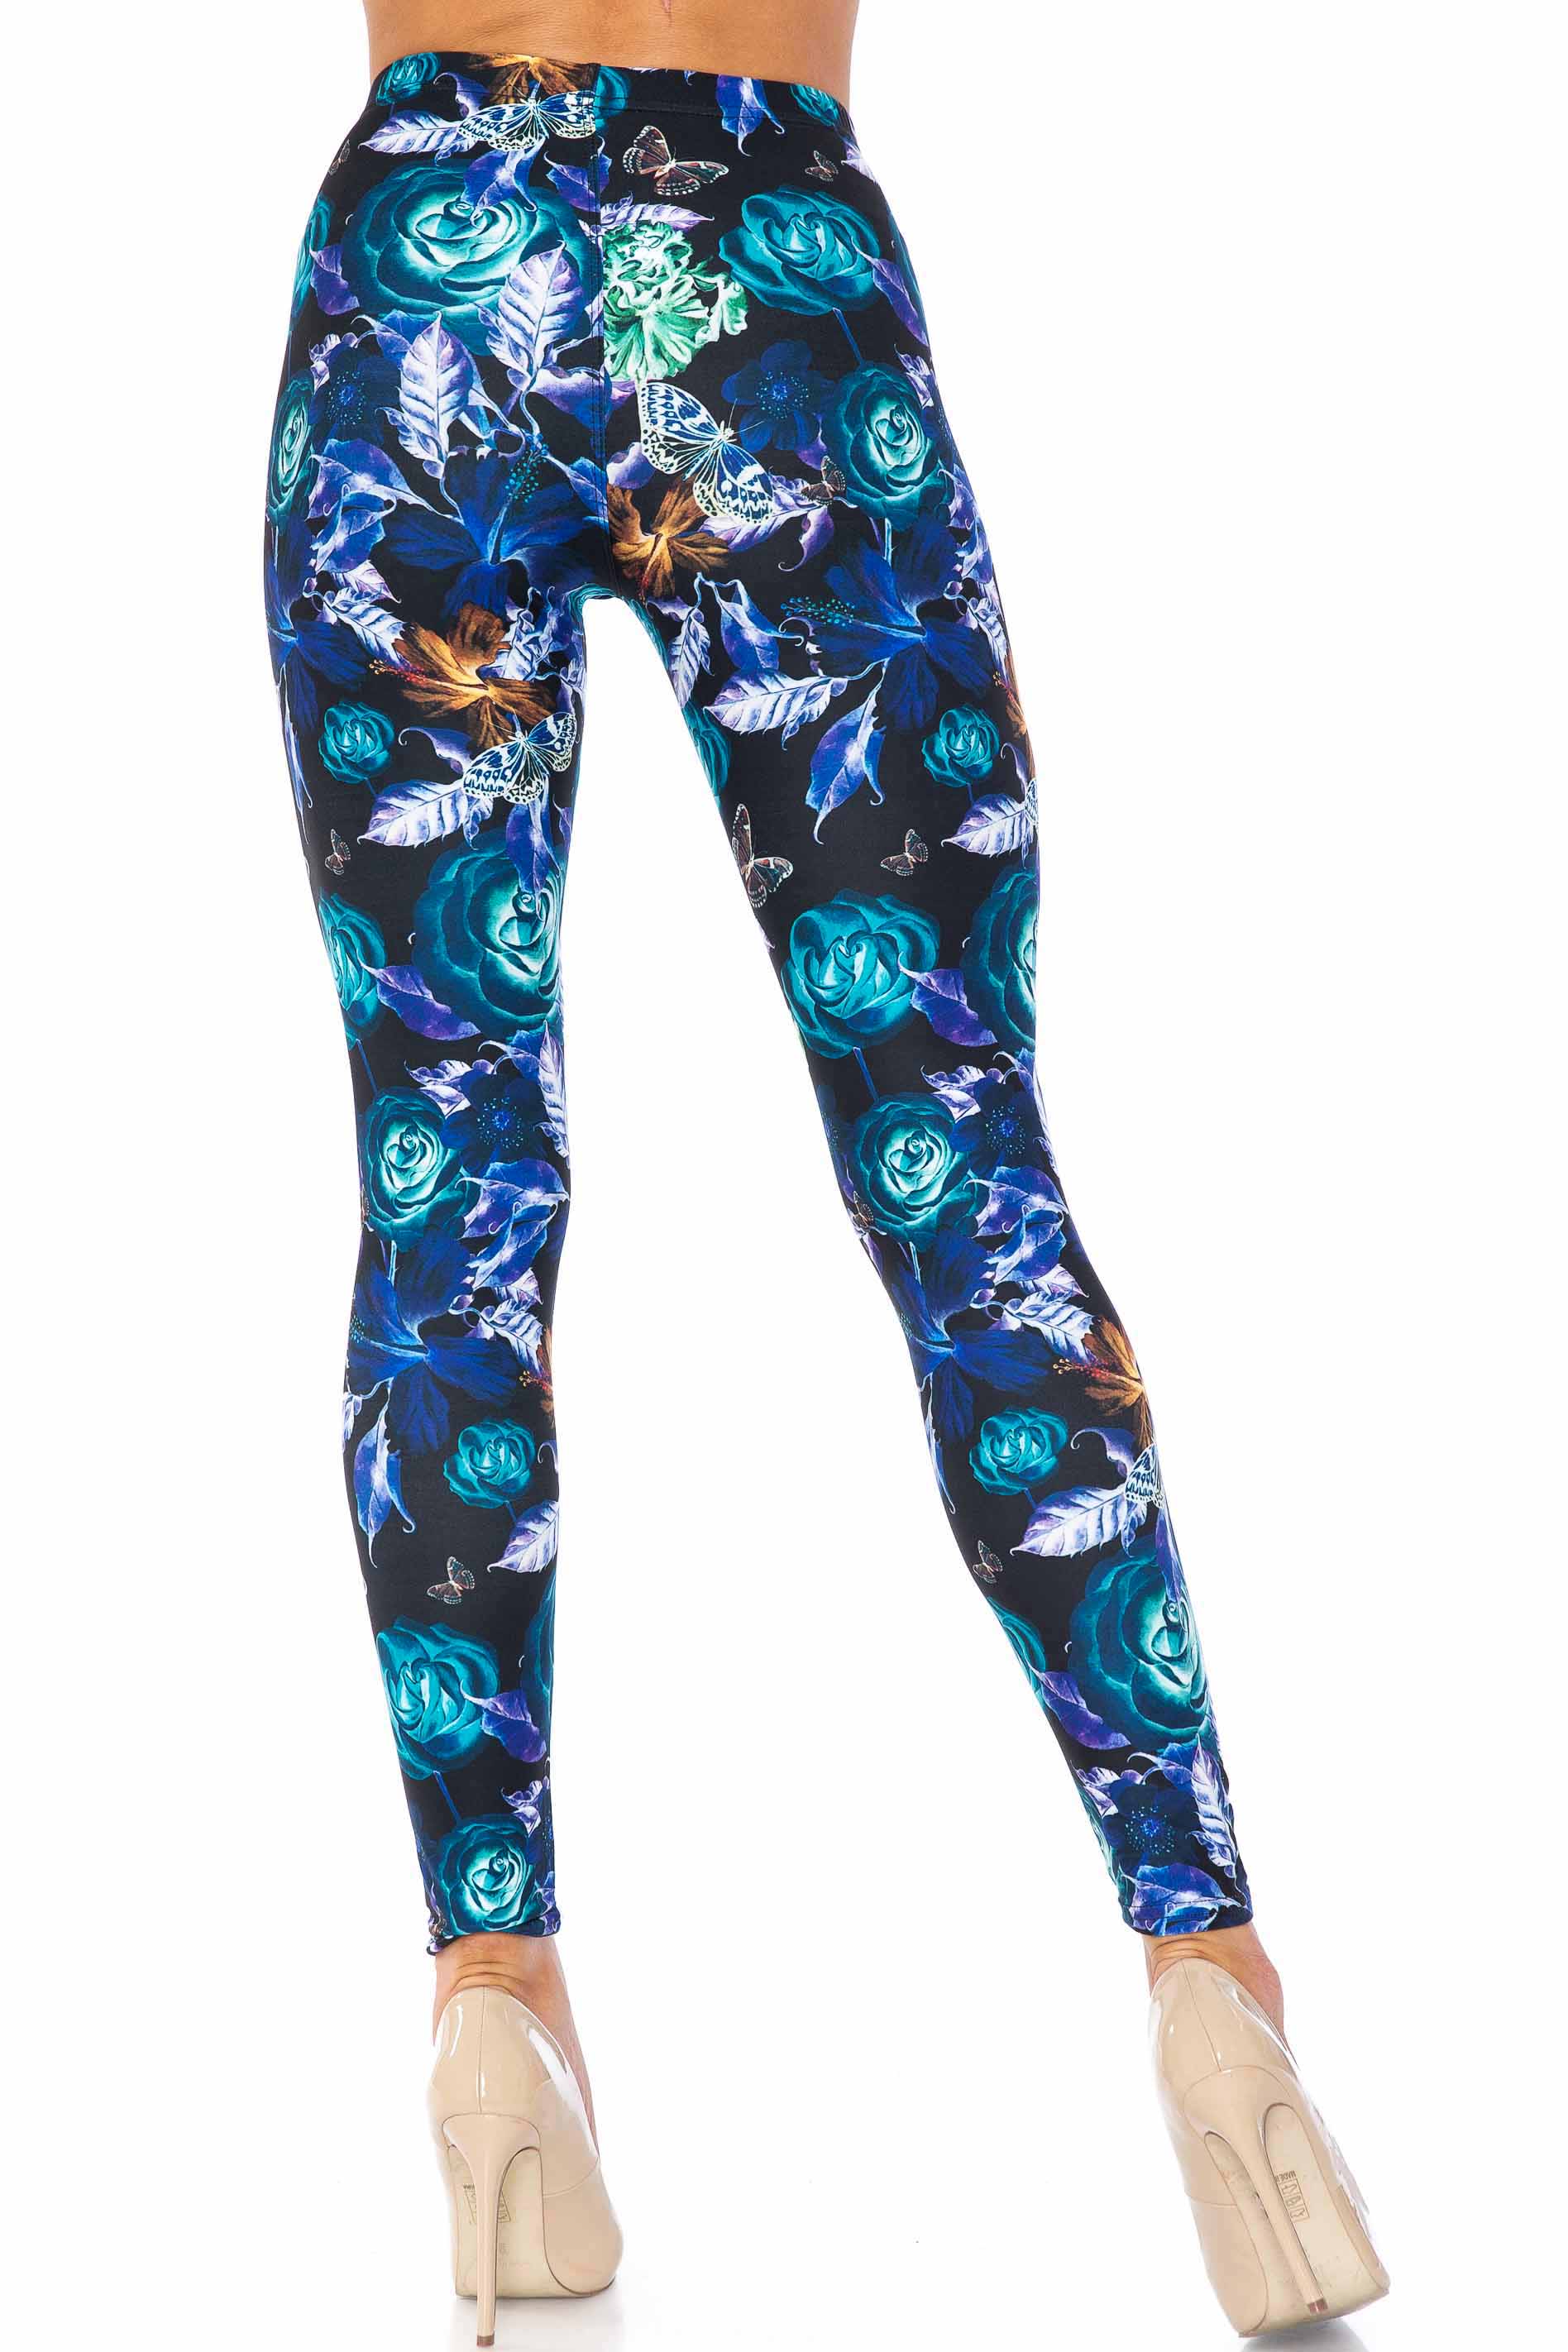 Wholesale Creamy Soft Electric Blue Floral Butterfly Leggings - USA Fashion™